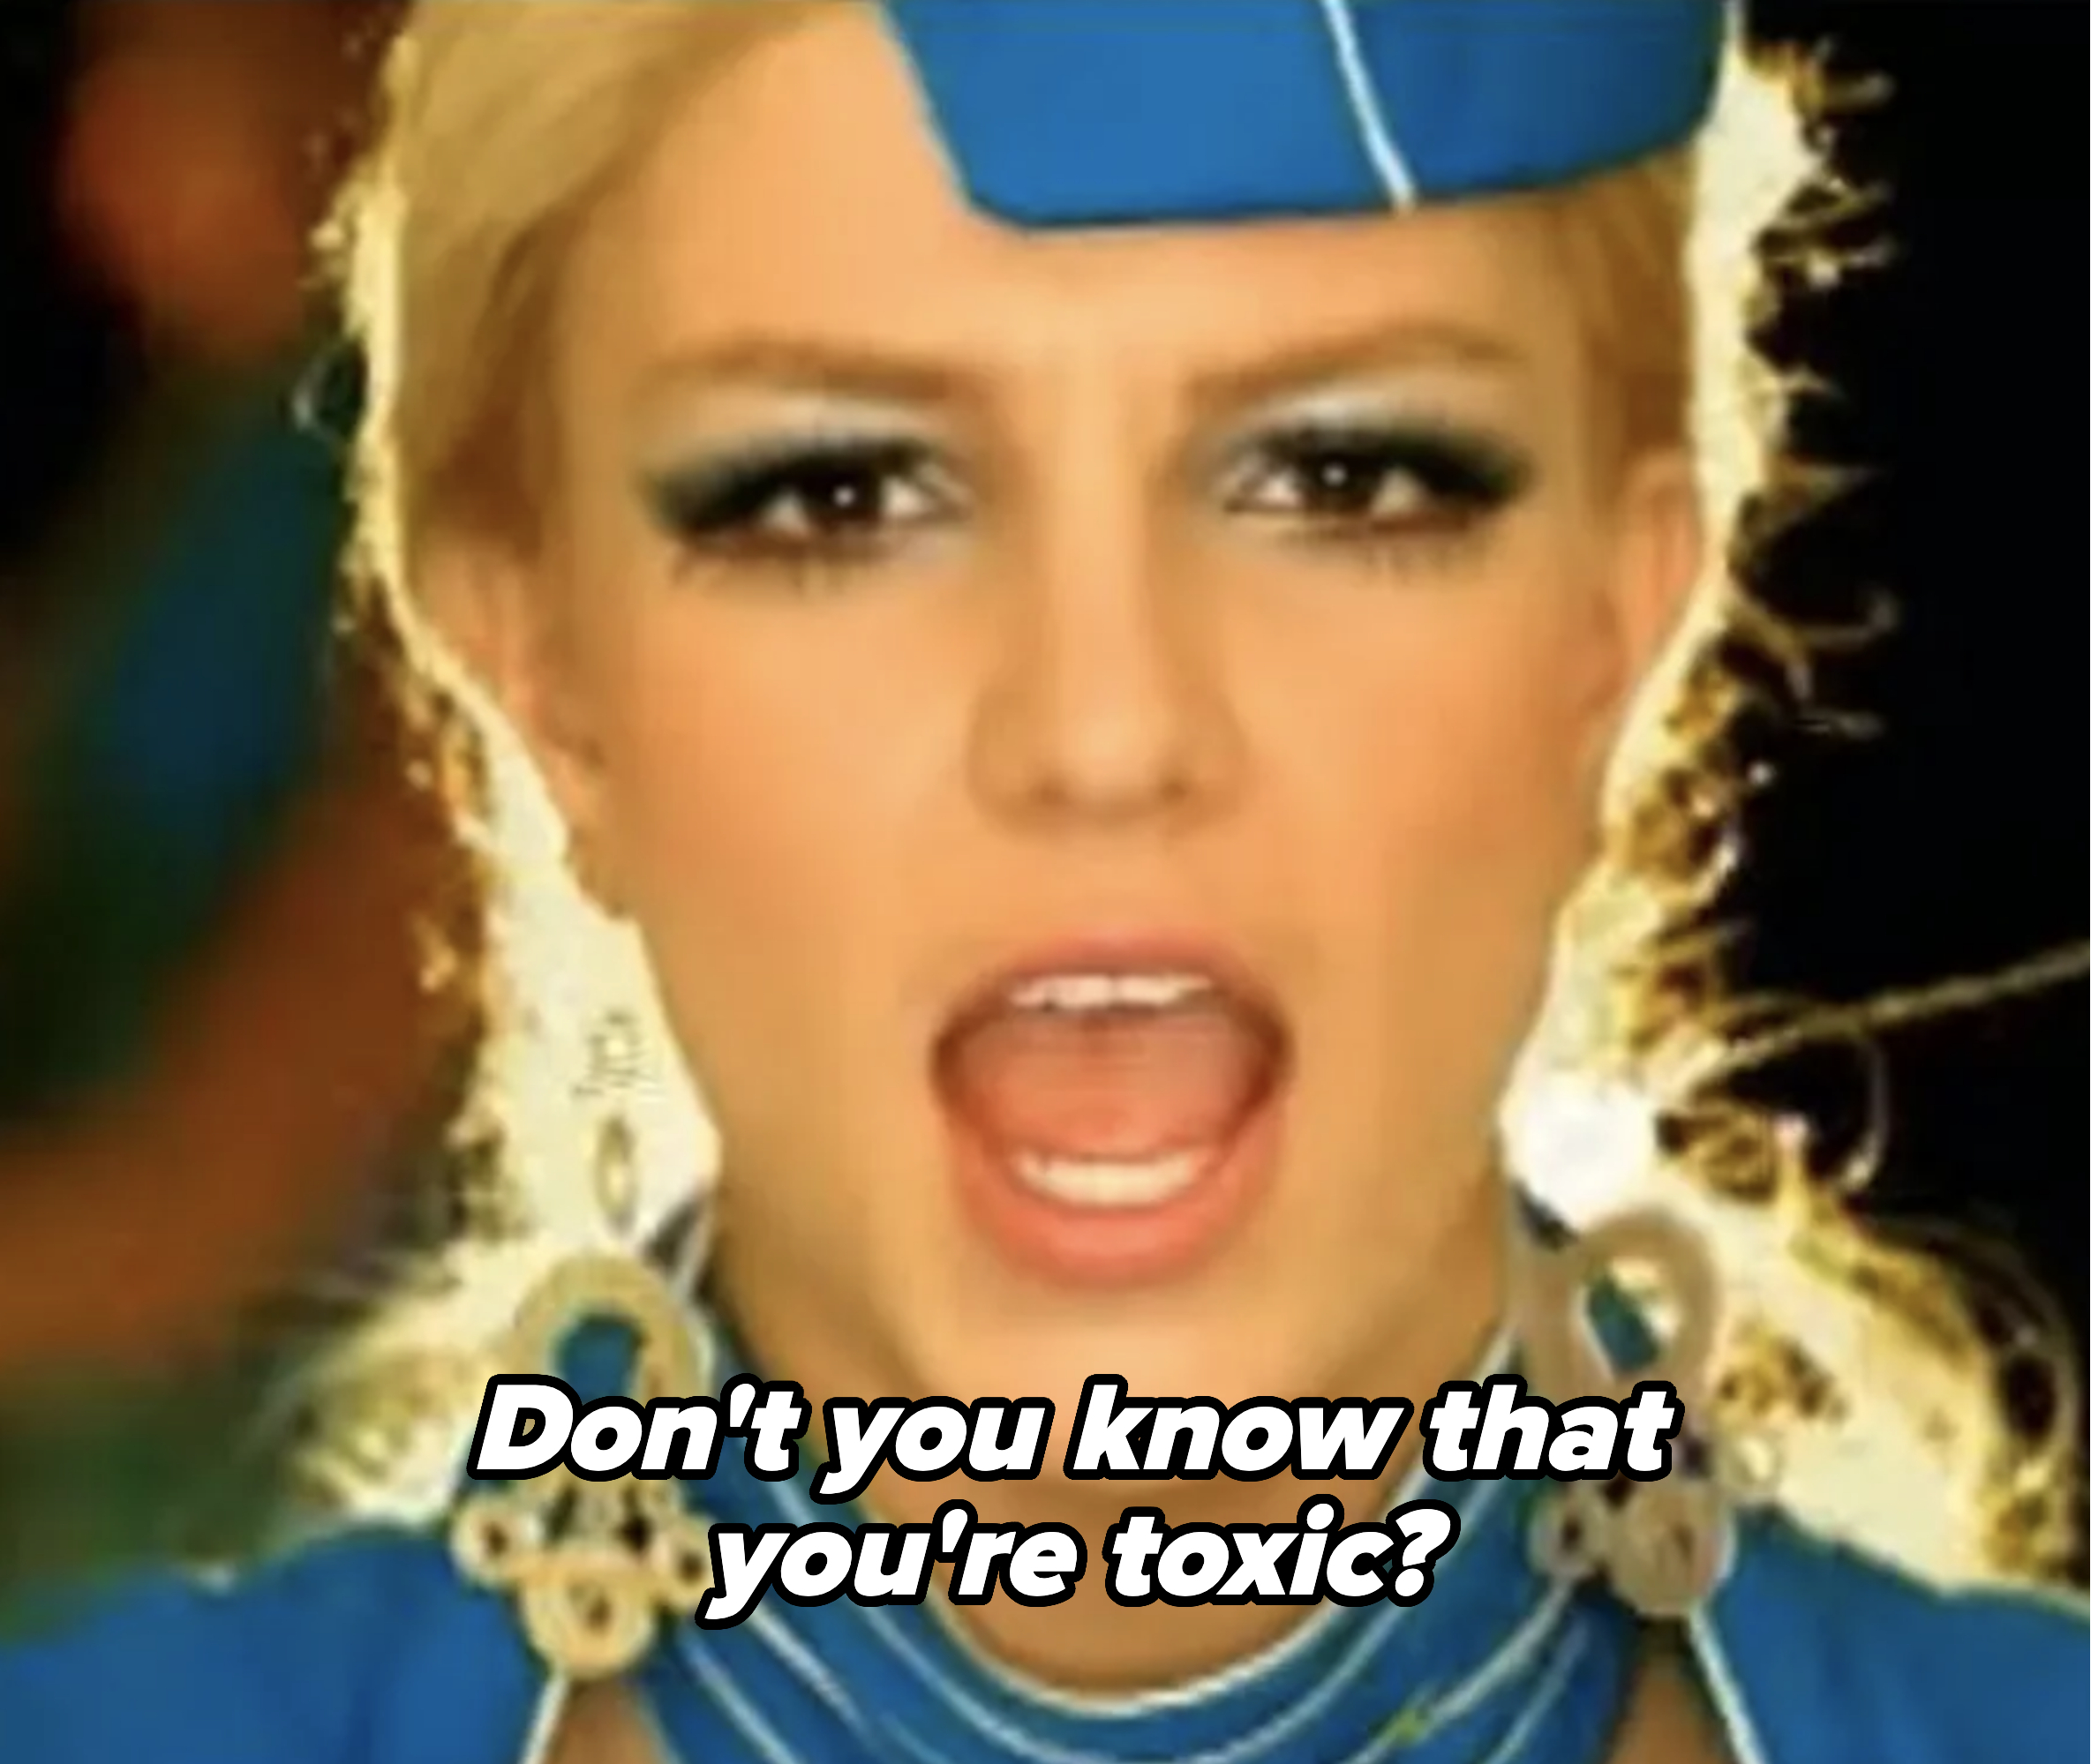 Britney Spears in her &quot;Toxic&quot; music video saying dont you know that you&#x27;re toxic